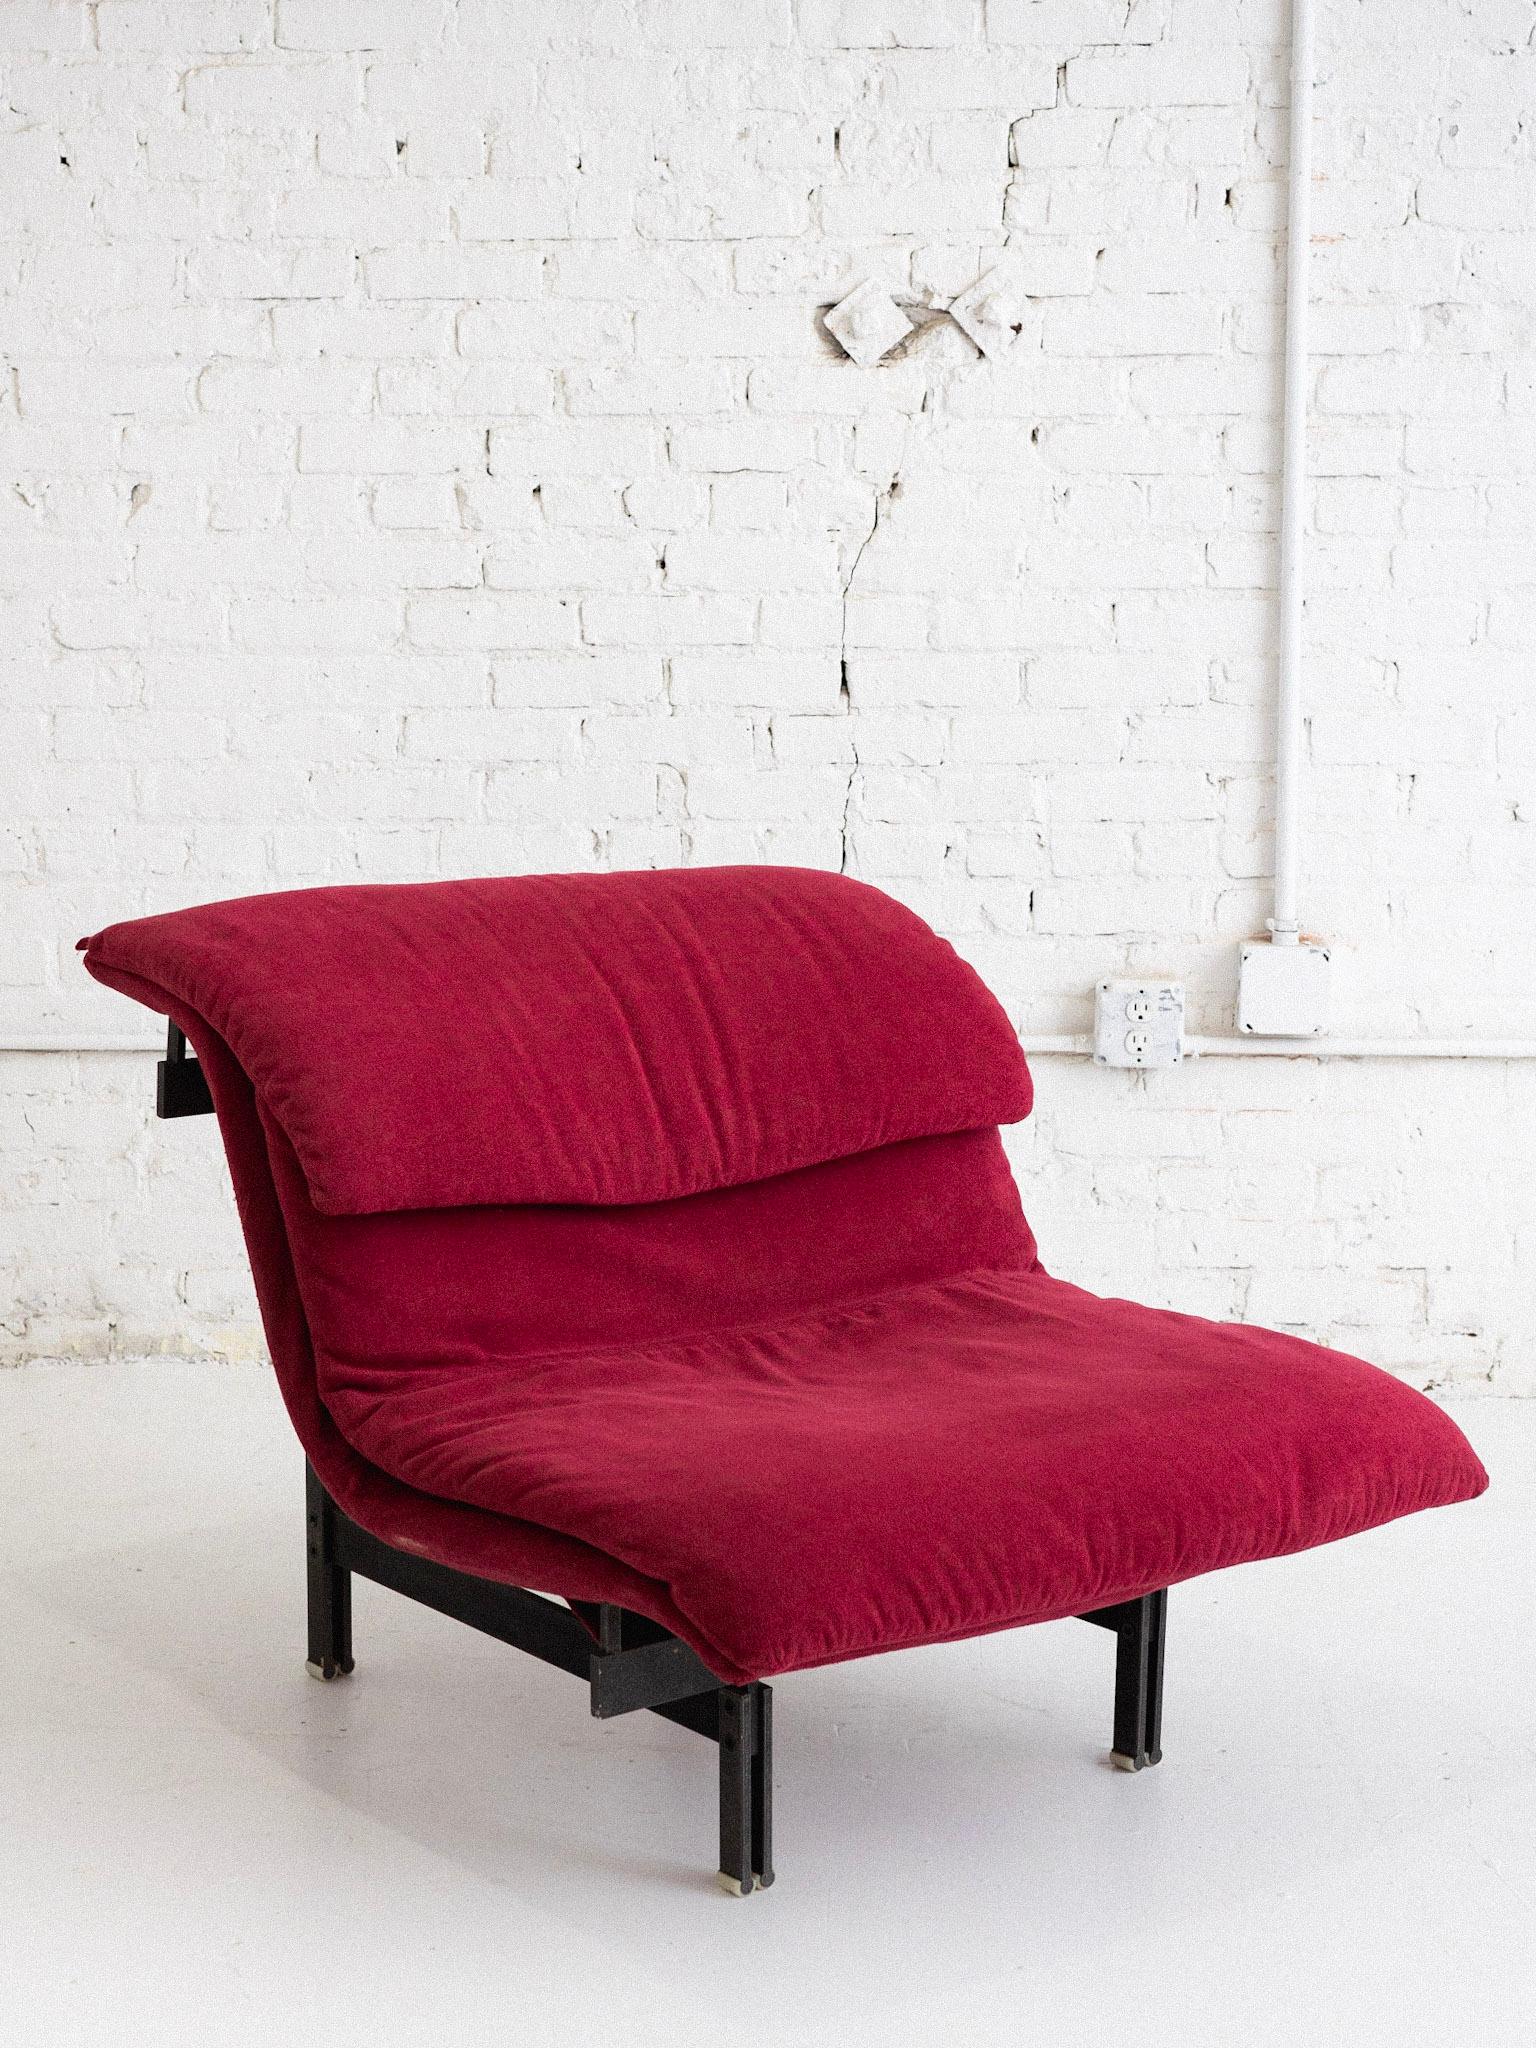 A “Wave” lounge chair by Giovanni Offredi for Saporiti. Heavy textured metal base supports a wave form upholstered seat. Original red textured upholstery. 2 chairs and 1 ottoman available, all sold separately. Sourced in Northern Italy.